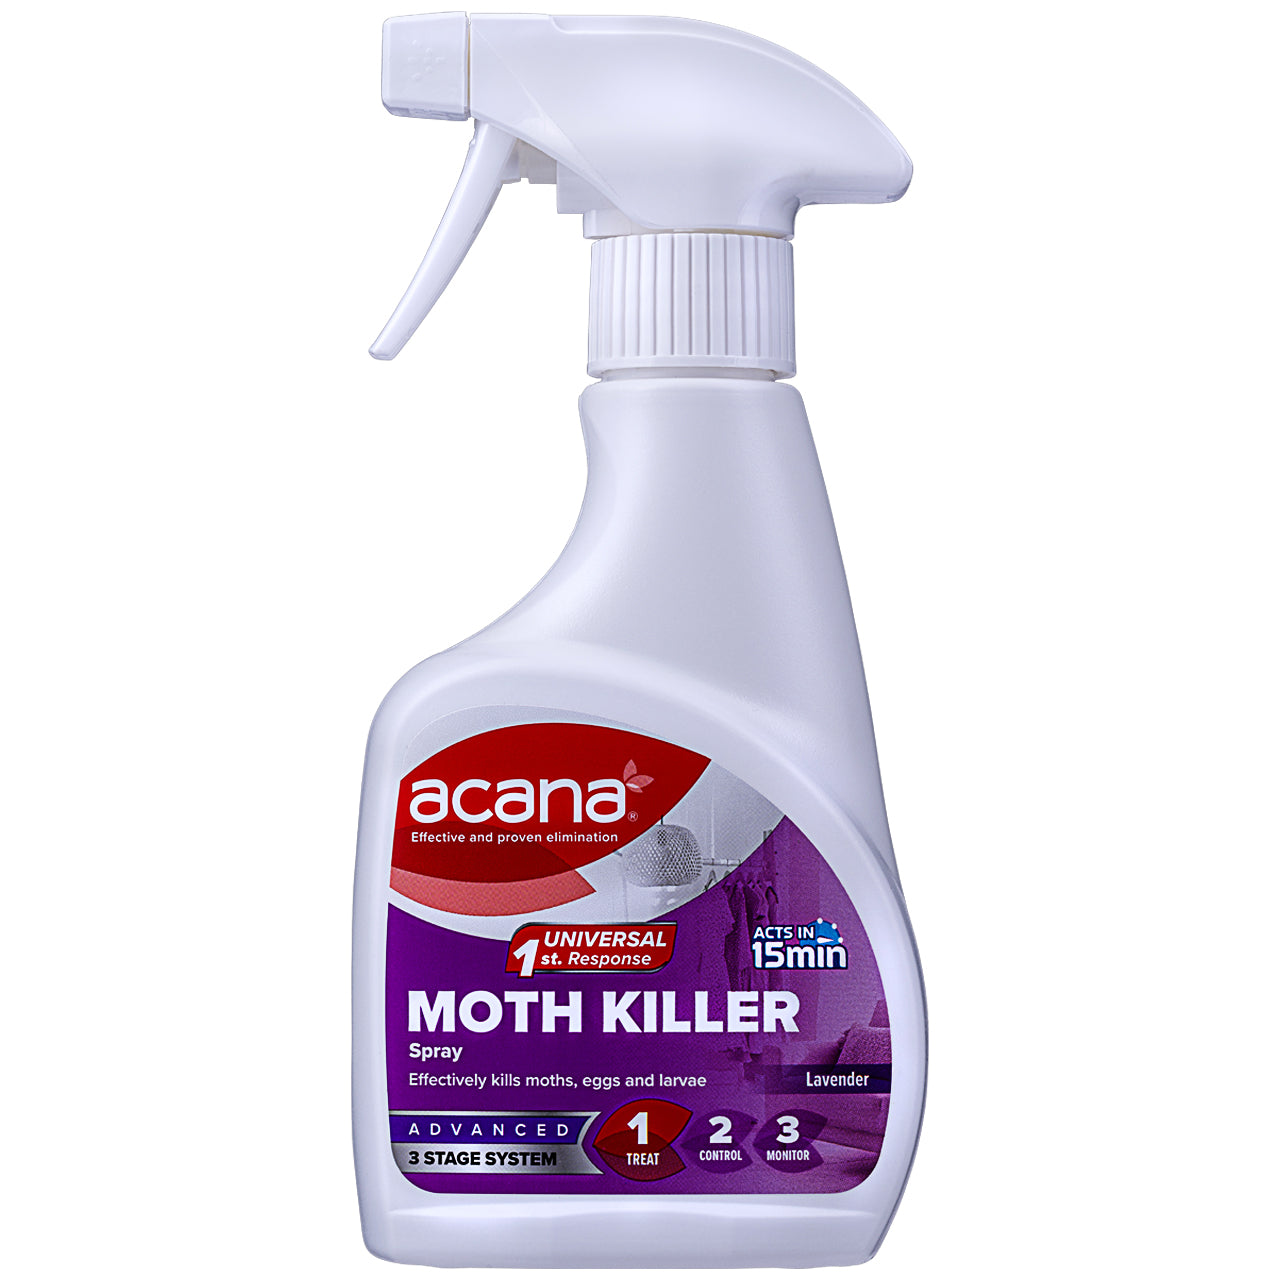 Small Moths In House – Stamp Out Moths With These Moth Killers!